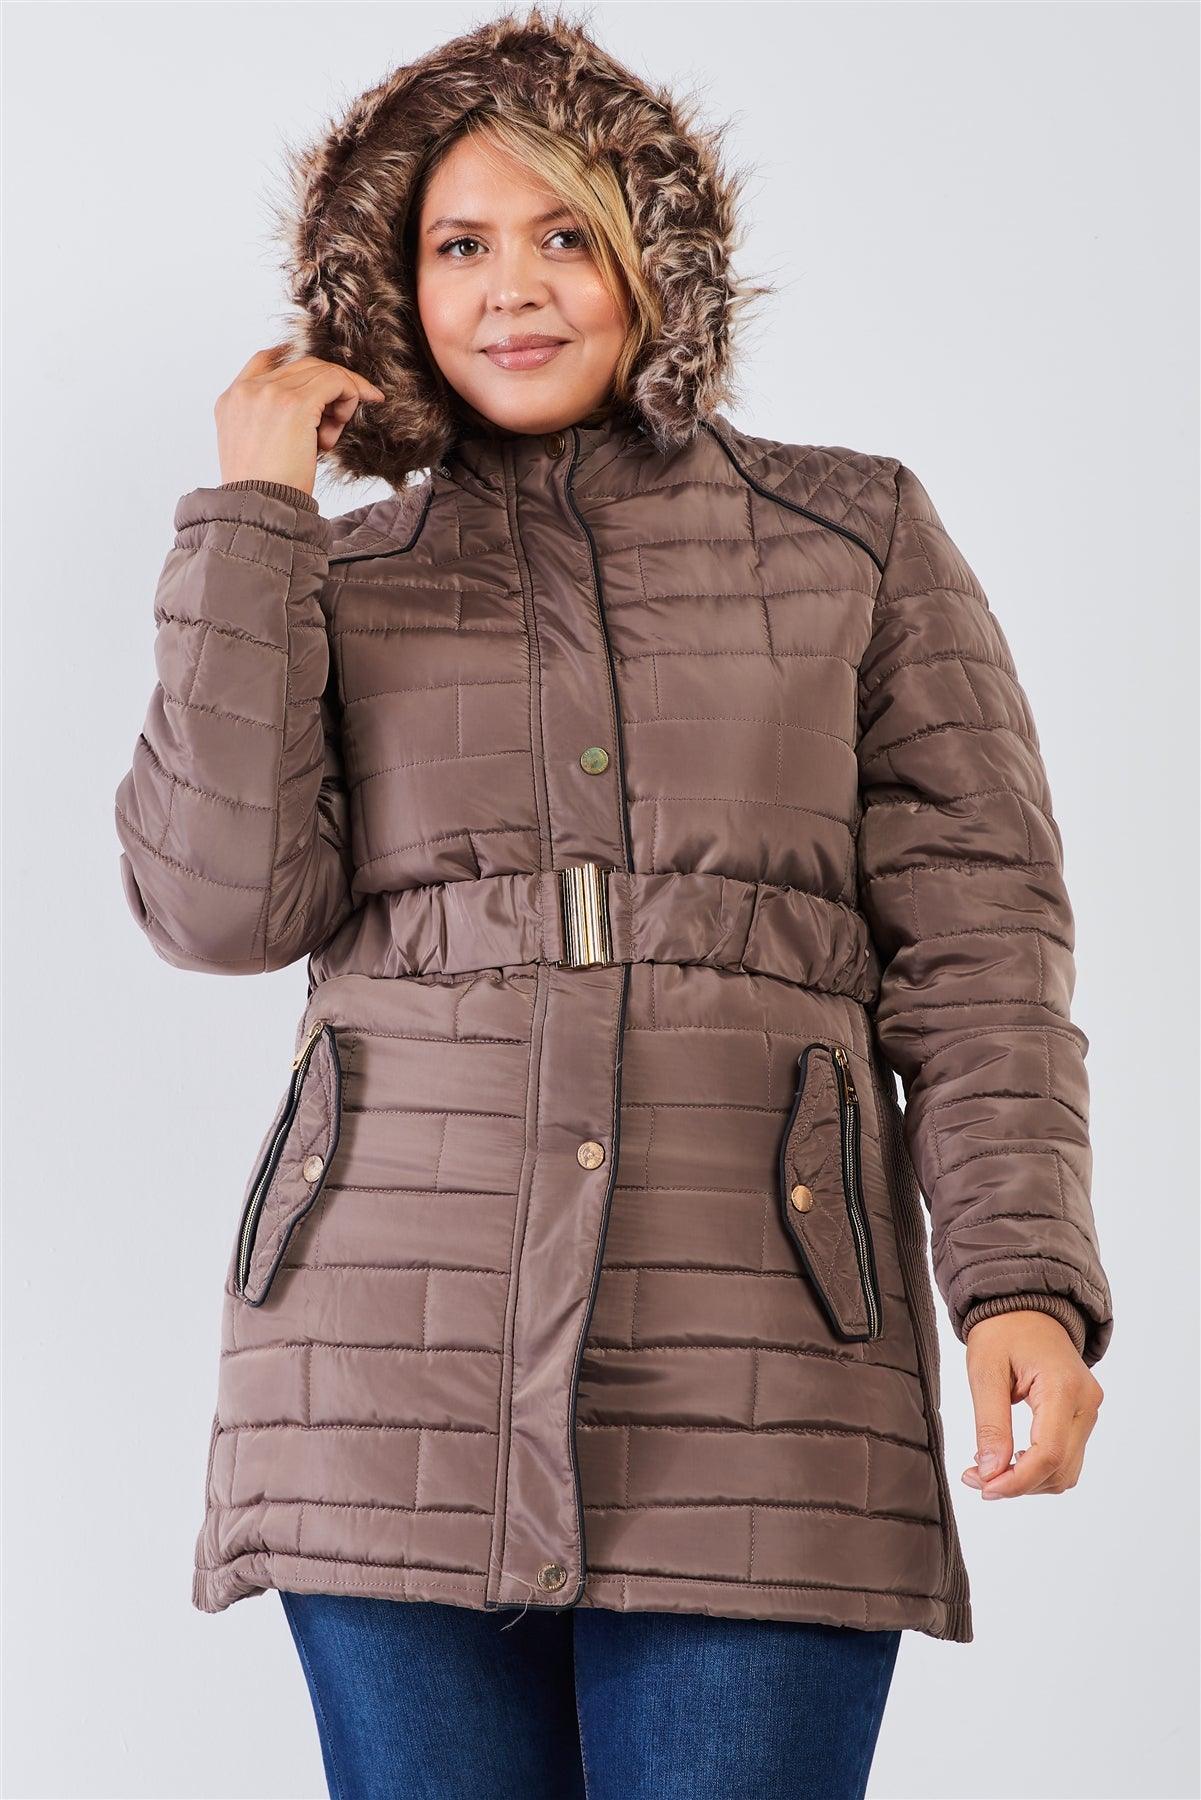 Junior Plus Taupe Brown Diamond Quilt Faux Fur Hood Belted Padded Long Puffer Jacket /1-1-1-1